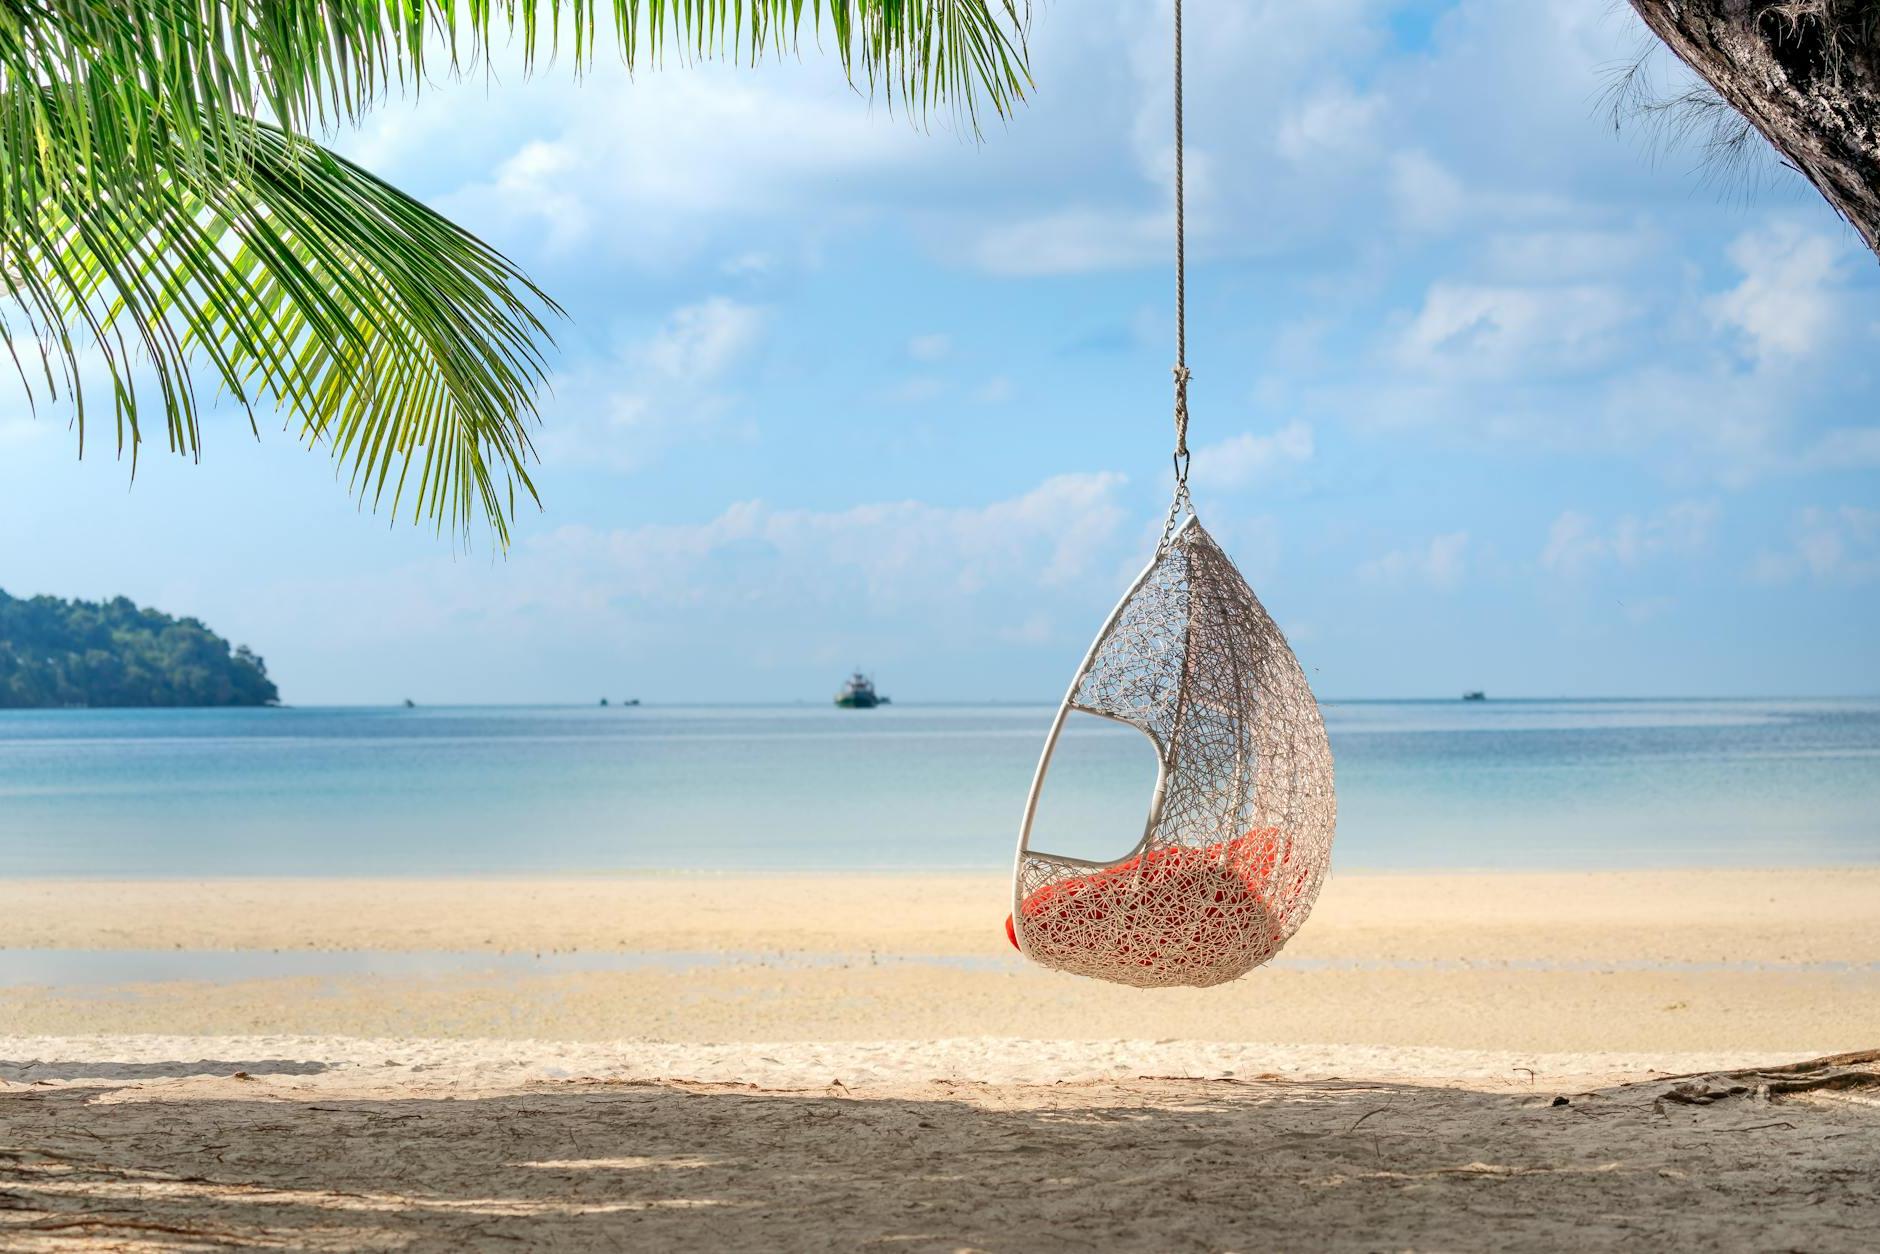 Amazing view of cozy wicker egg chair hanging on palm above sandy beach against endless blue sea in tropical resort